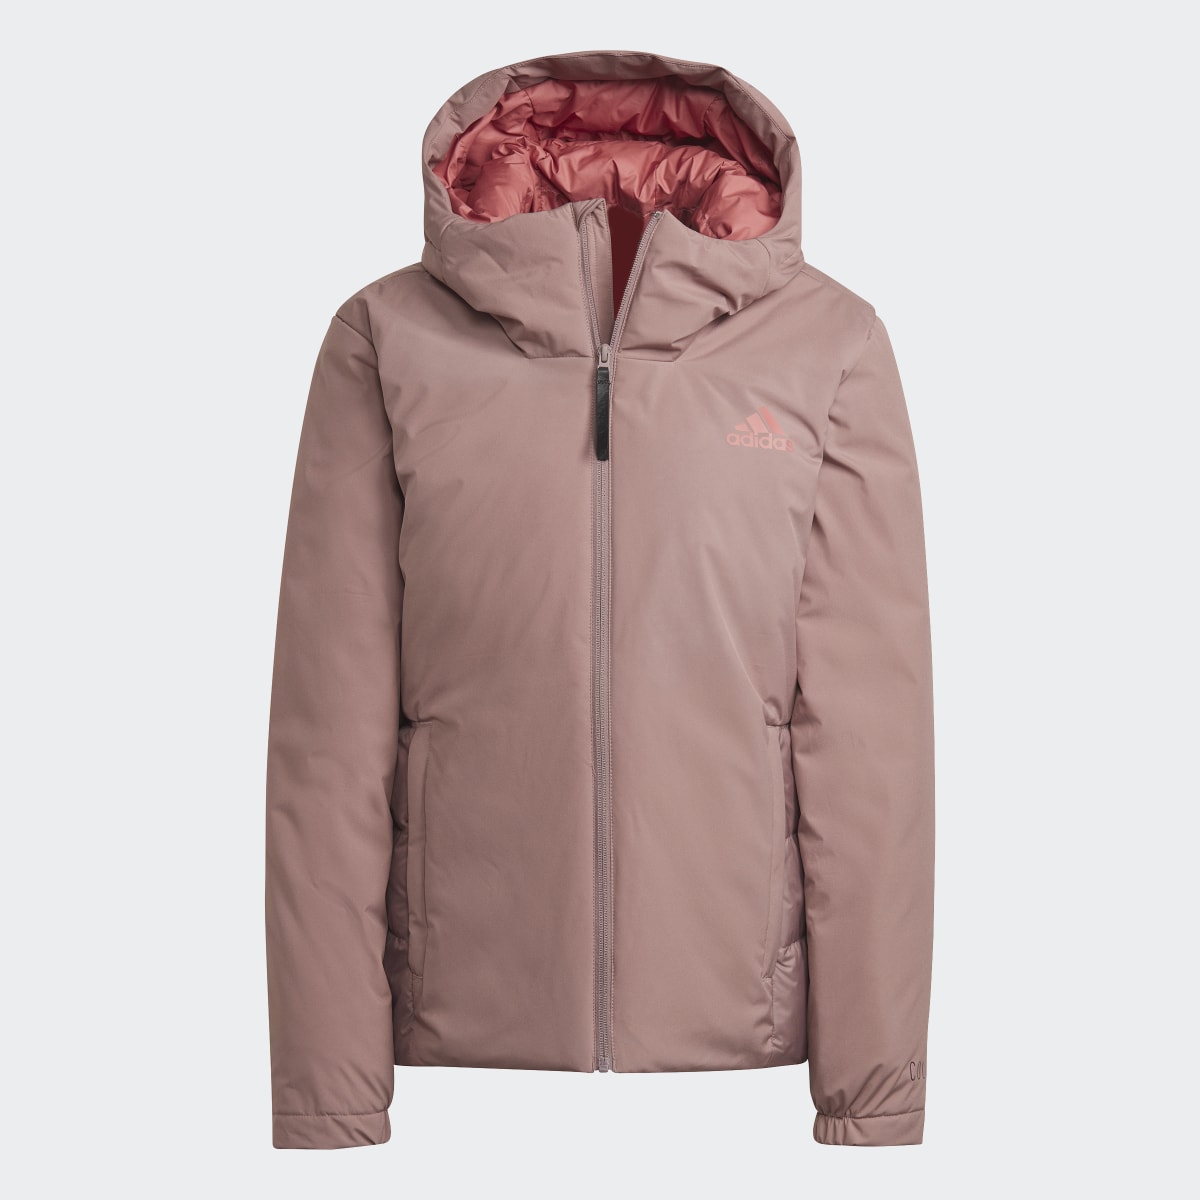 Adidas Traveer COLD.RDY Jacket. 5